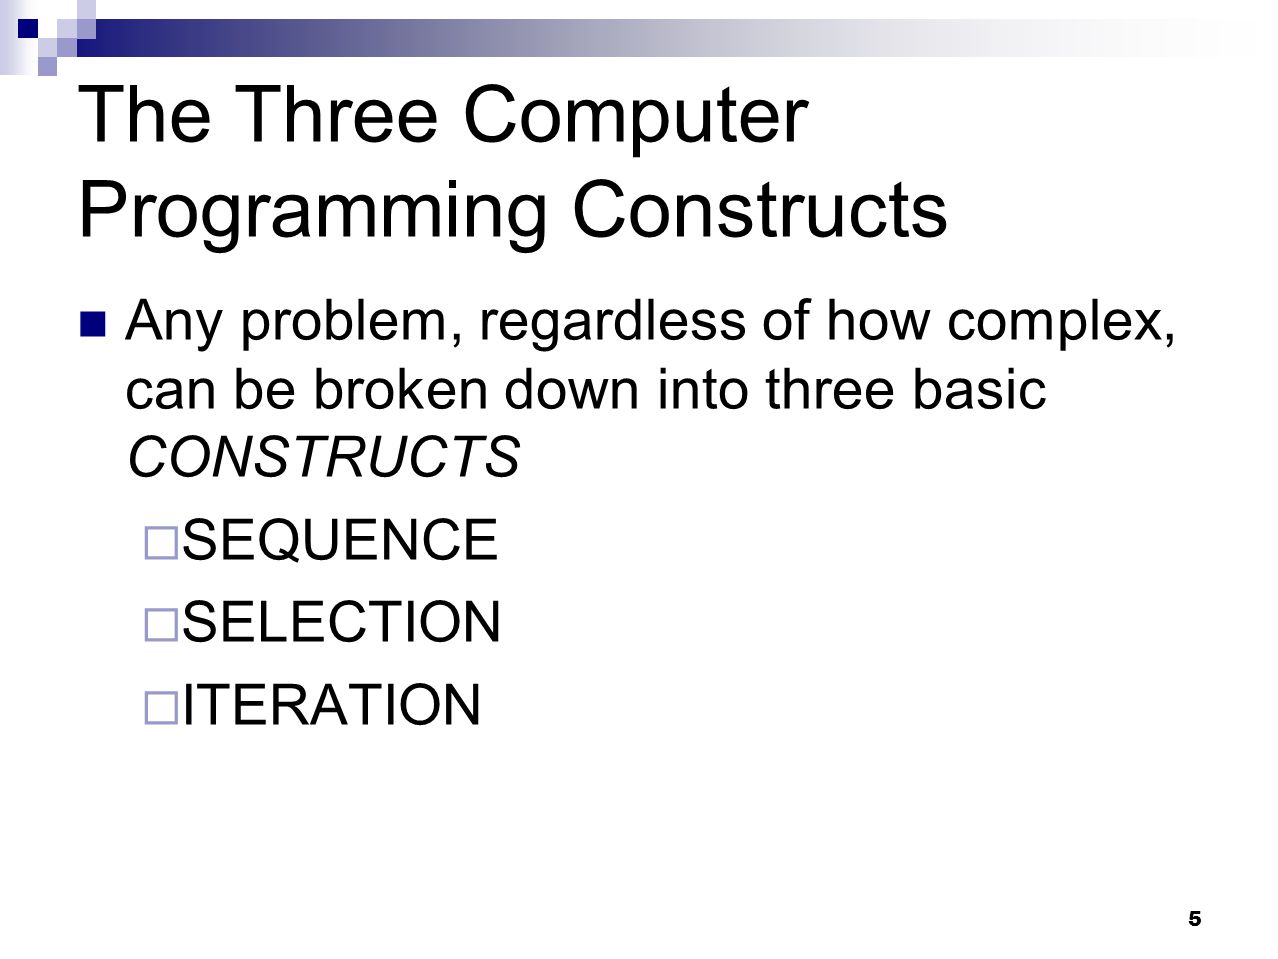 The Three Computer Programming Constructs